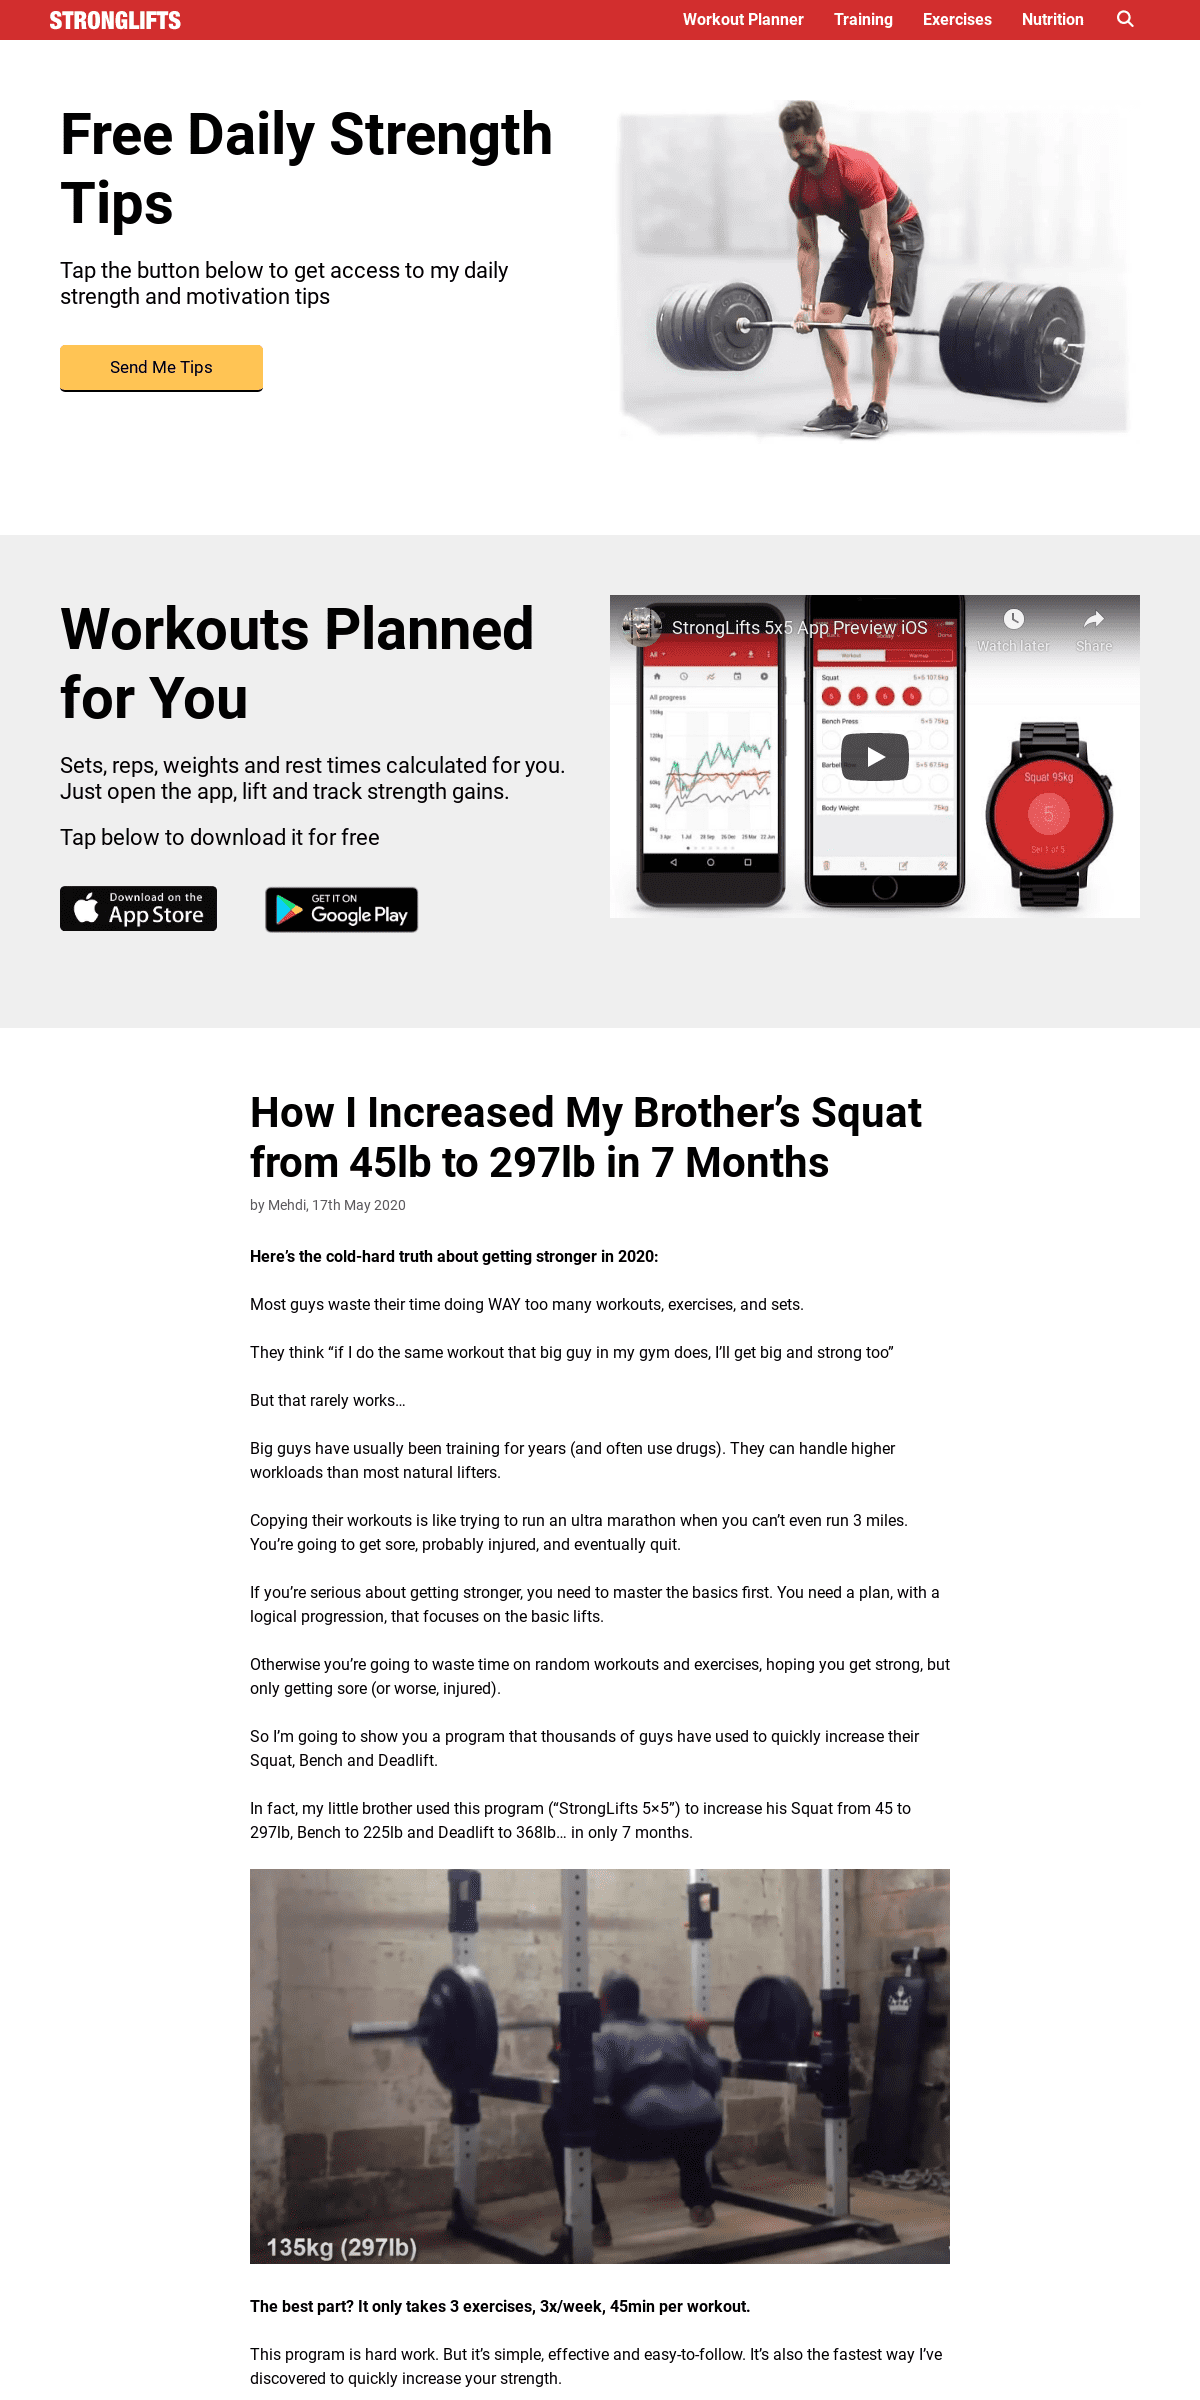 A complete backup of stronglifts.com